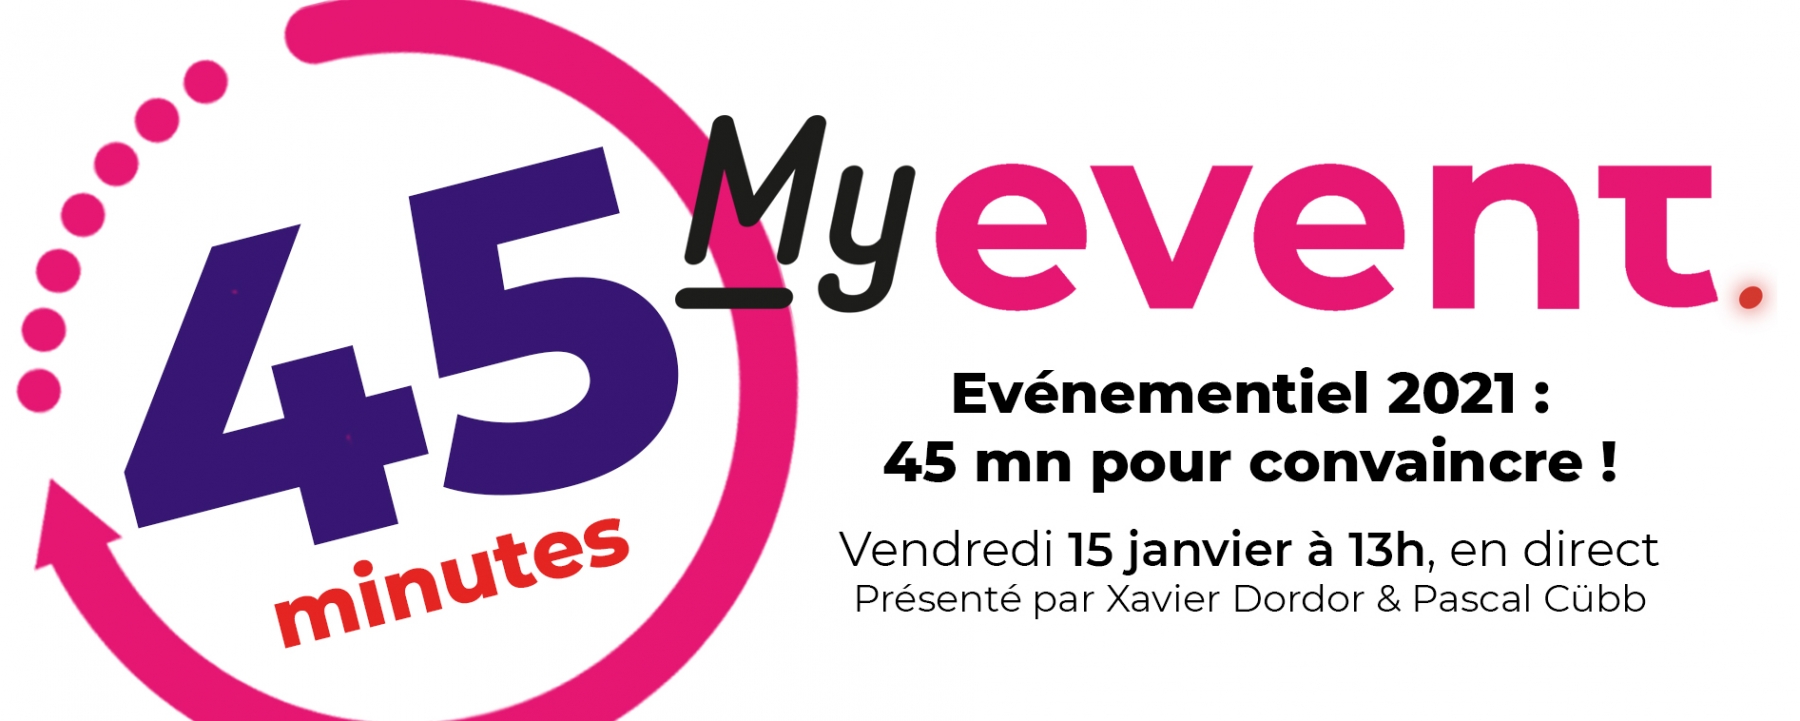 Le Cercle  MyEventNetwork